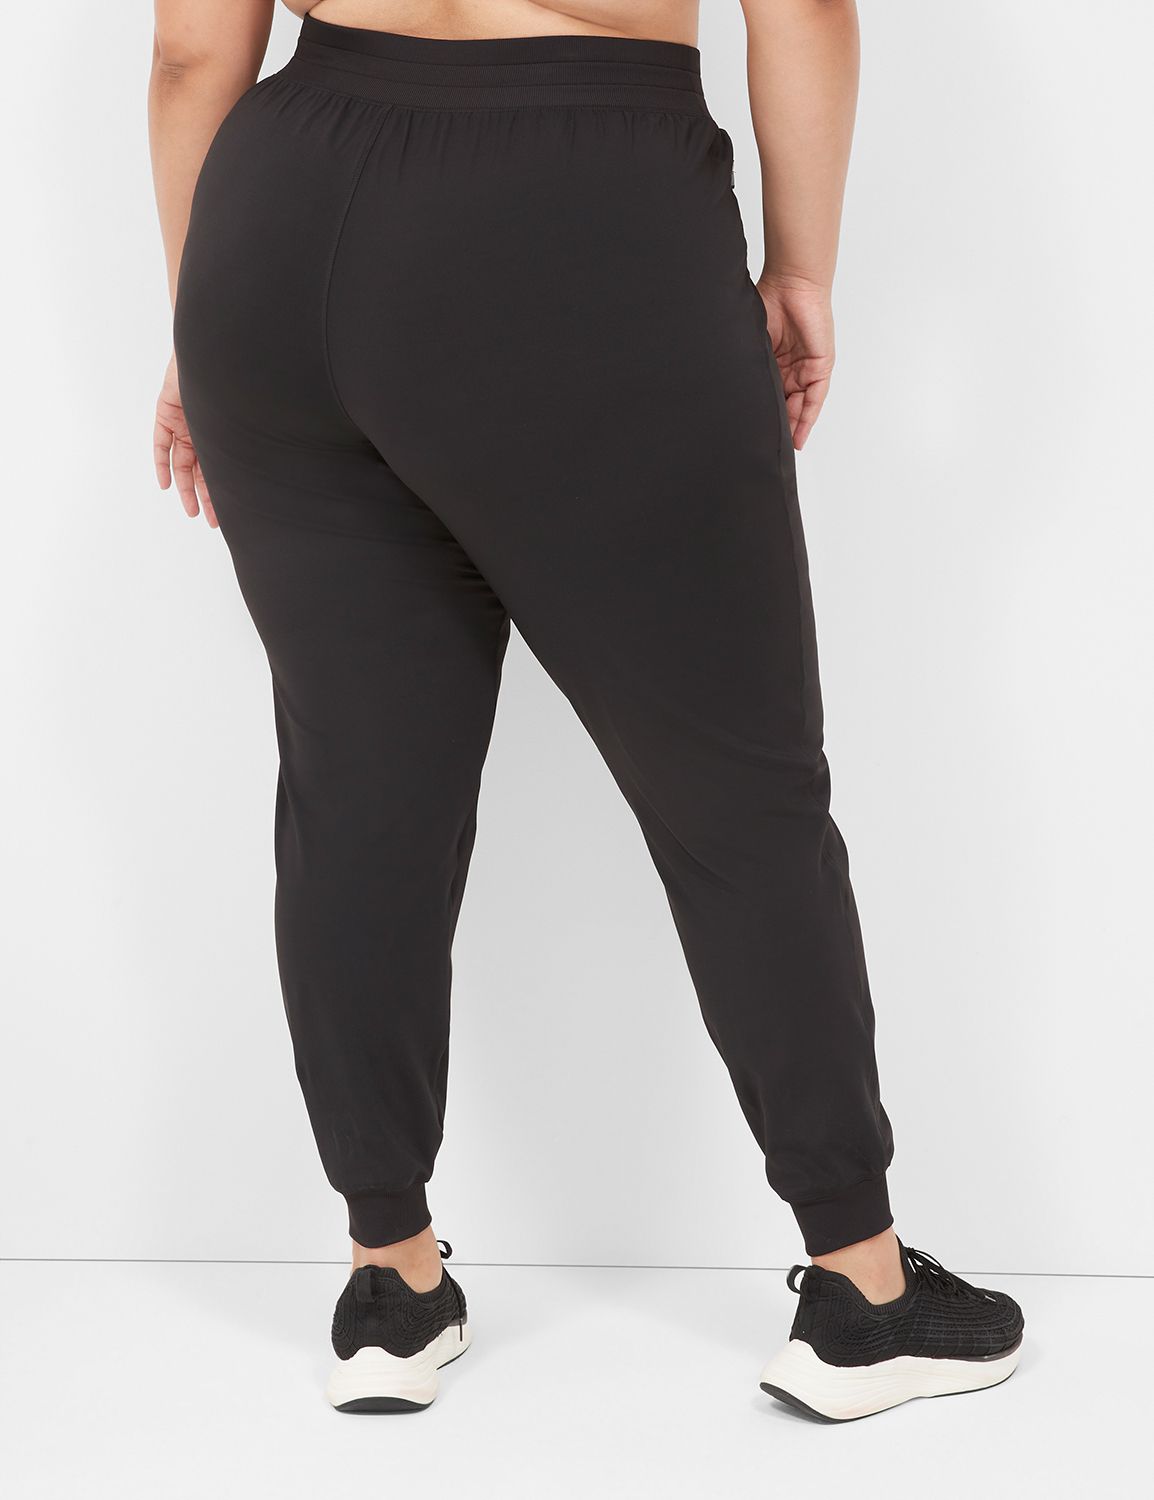  the buti-bag company Plus Size Yoga Pants with Front Pockets,  Generously Oversized, Thick Cotton Jersey, 2X/3X (Size 22-24) Black :  Clothing, Shoes & Jewelry